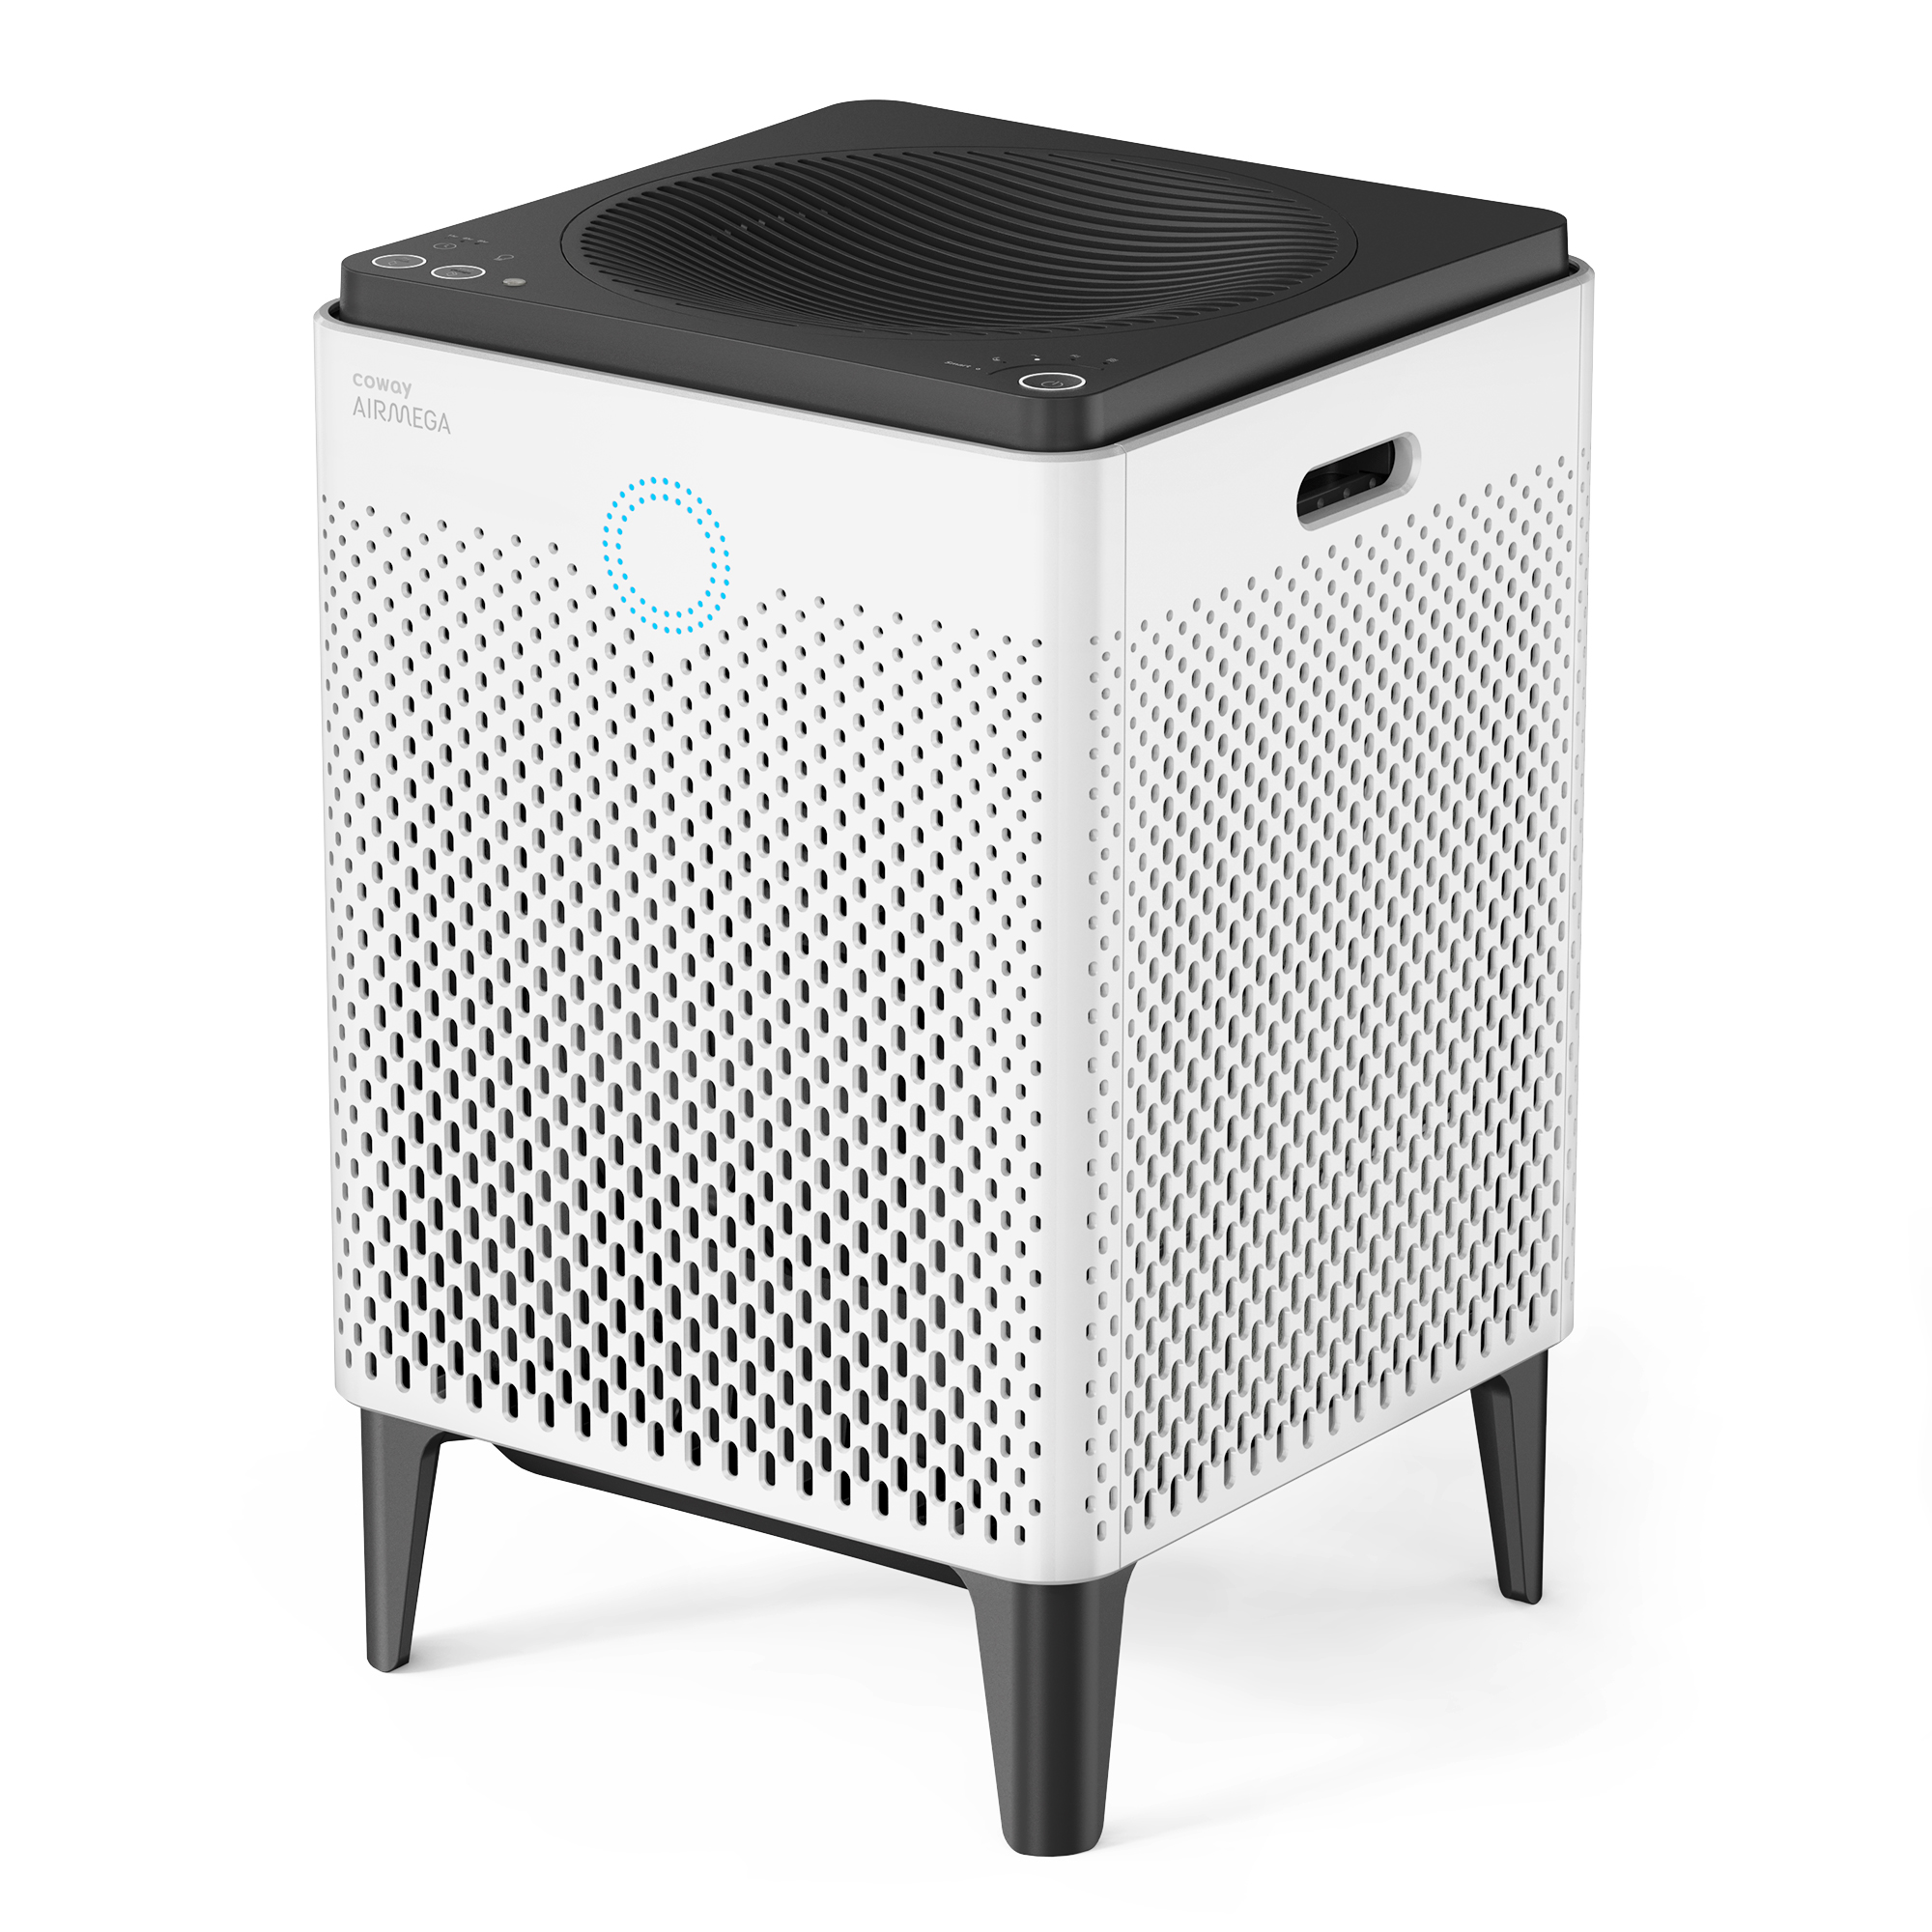 Coway Air Purifier Airmega 400 White True HEPA Air Purifier with 1560 sq ft Coverage, Auto, Eco, & Sleep Mode, Air Quality & Filter Replacement Indicator - image 1 of 7